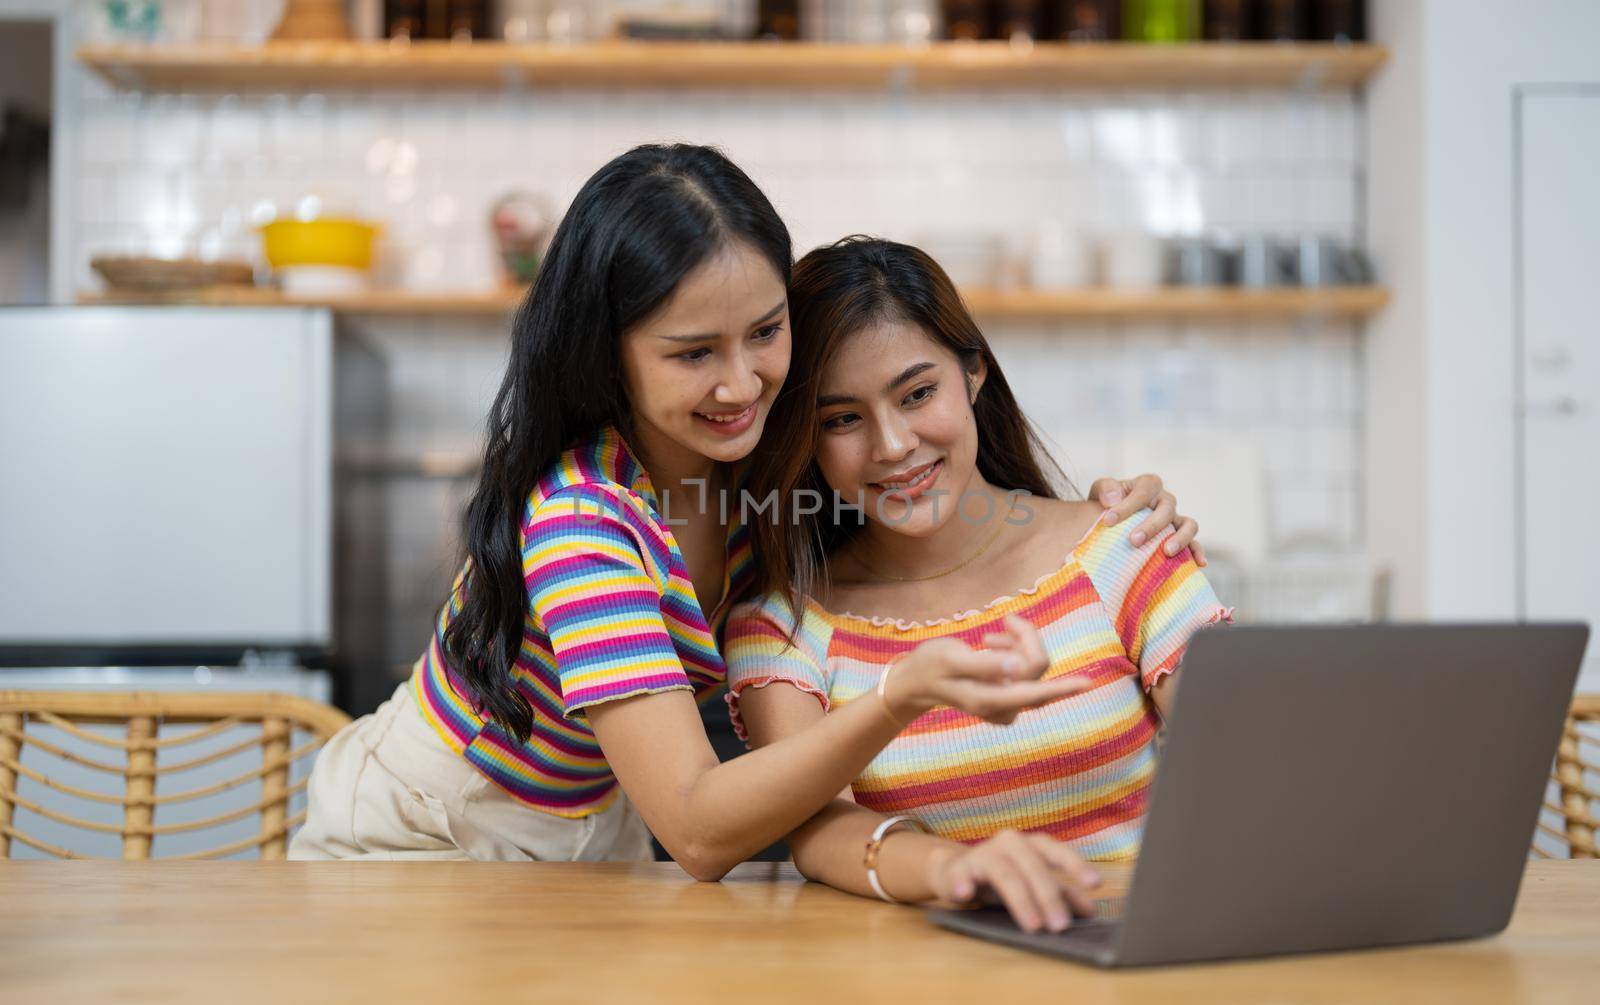 Happy lesbian lgbtq couple in love cuddling, laughing having fun at home. Two diverse pretty affectionate women hugging, bonding. Lgbt relationship concept.